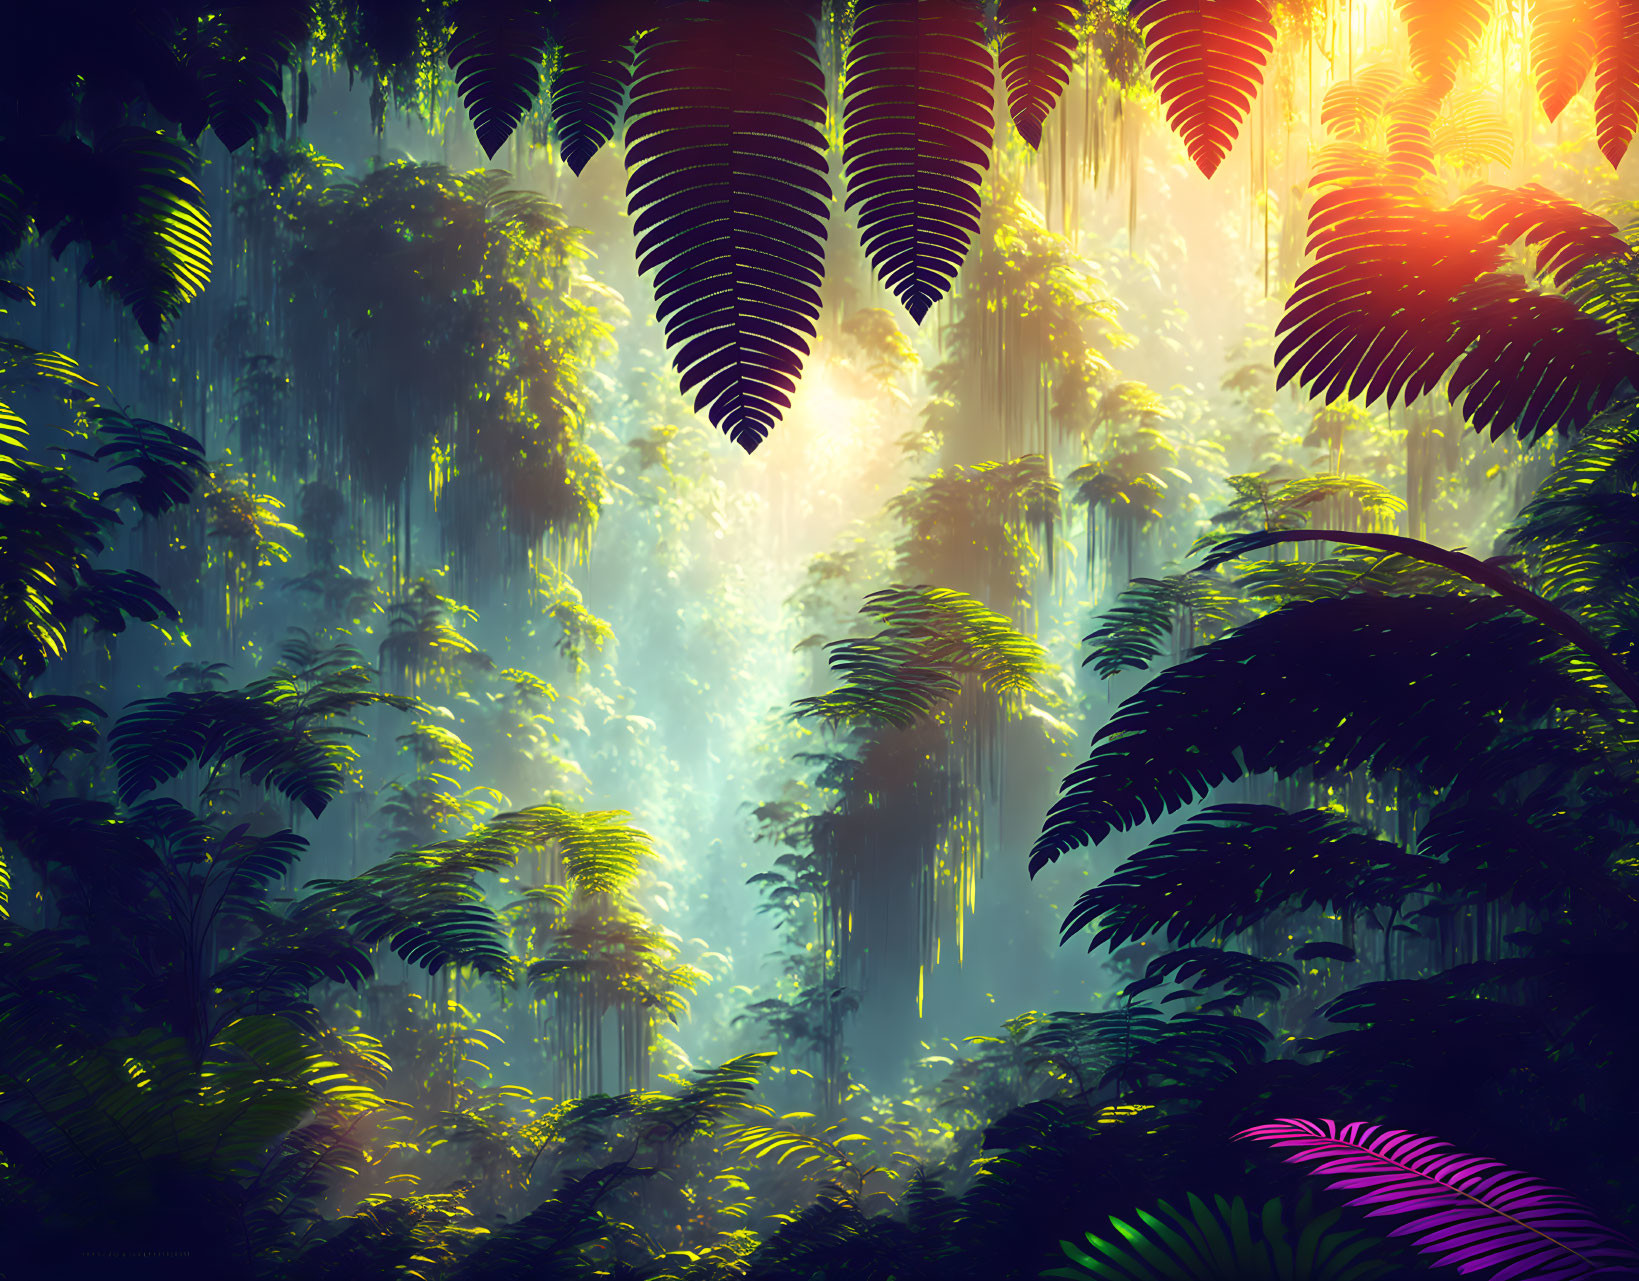 Sunlit Tropical Forest with Dense Foliage & Greenery